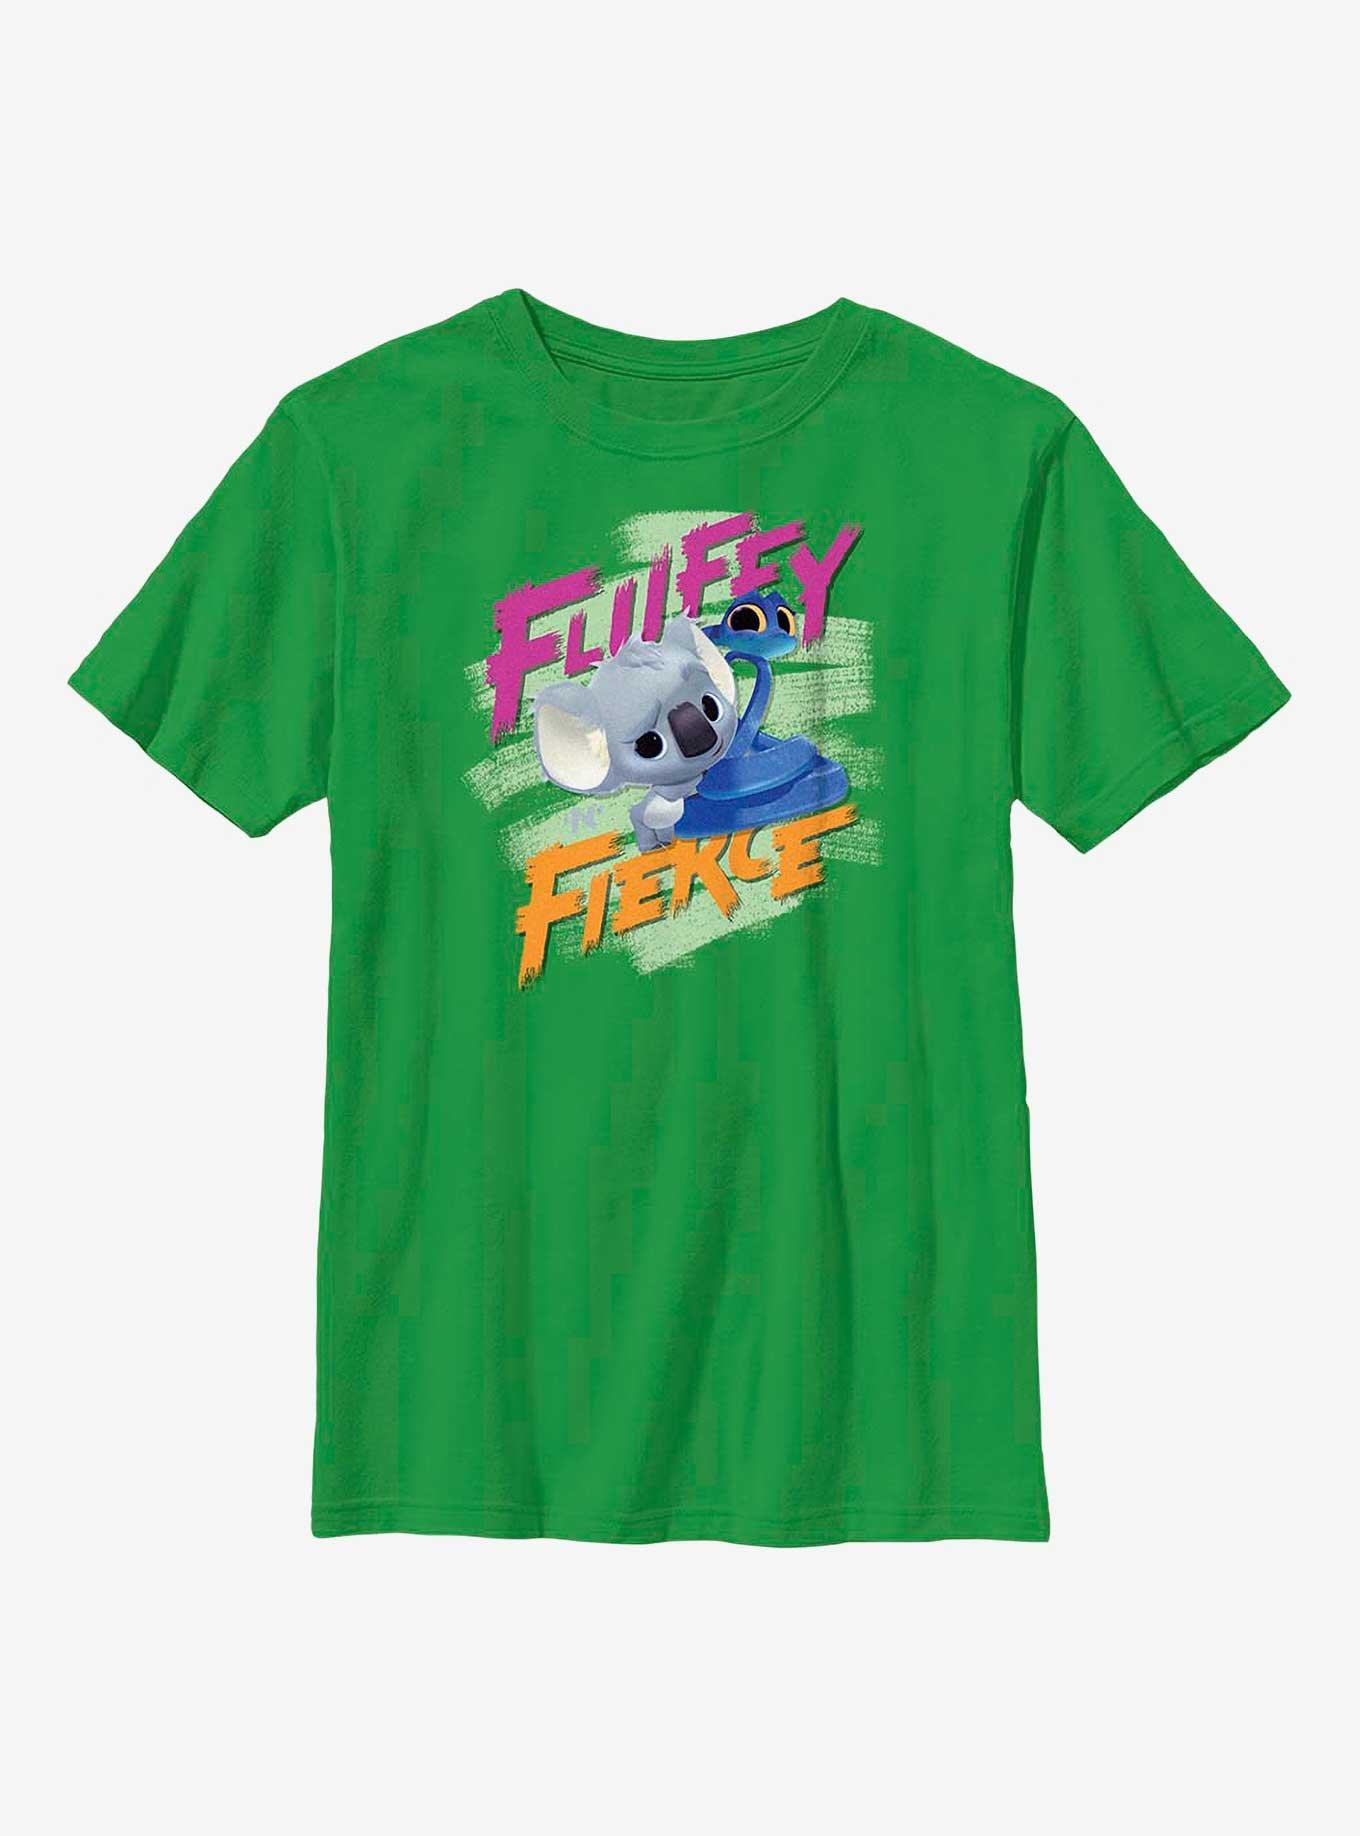 Back To The Outback Fluffy N Fierce Youth T-Shirt, KELLY, hi-res